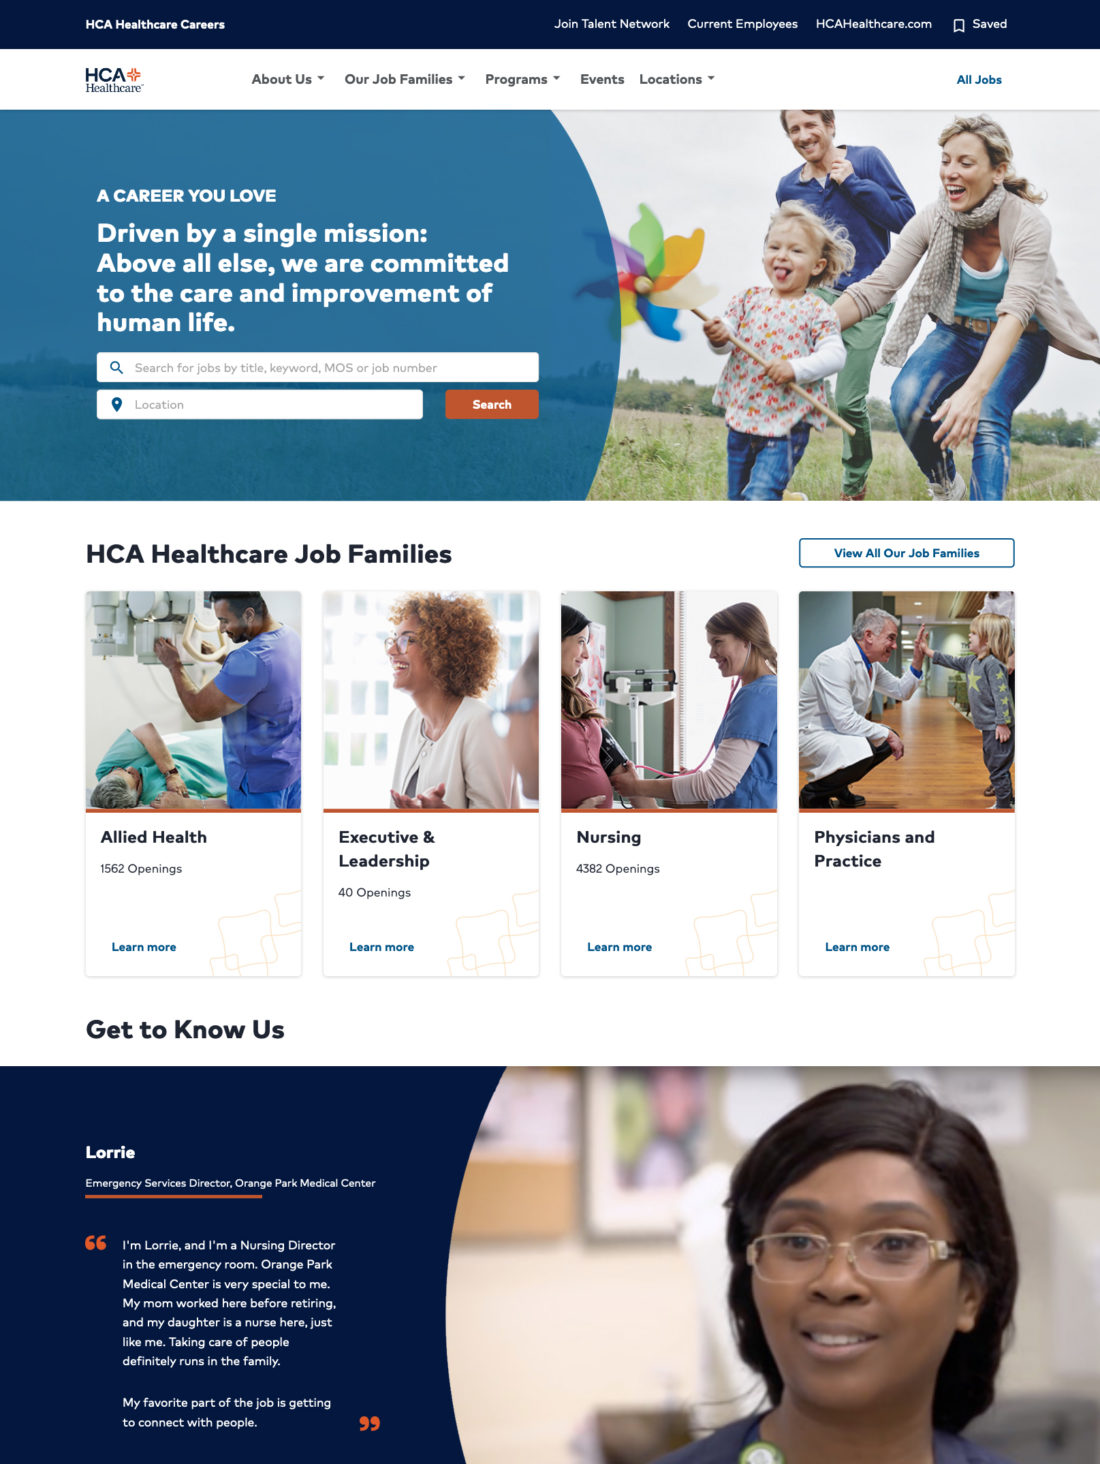 The homepage of the HCA Healthcare careers site